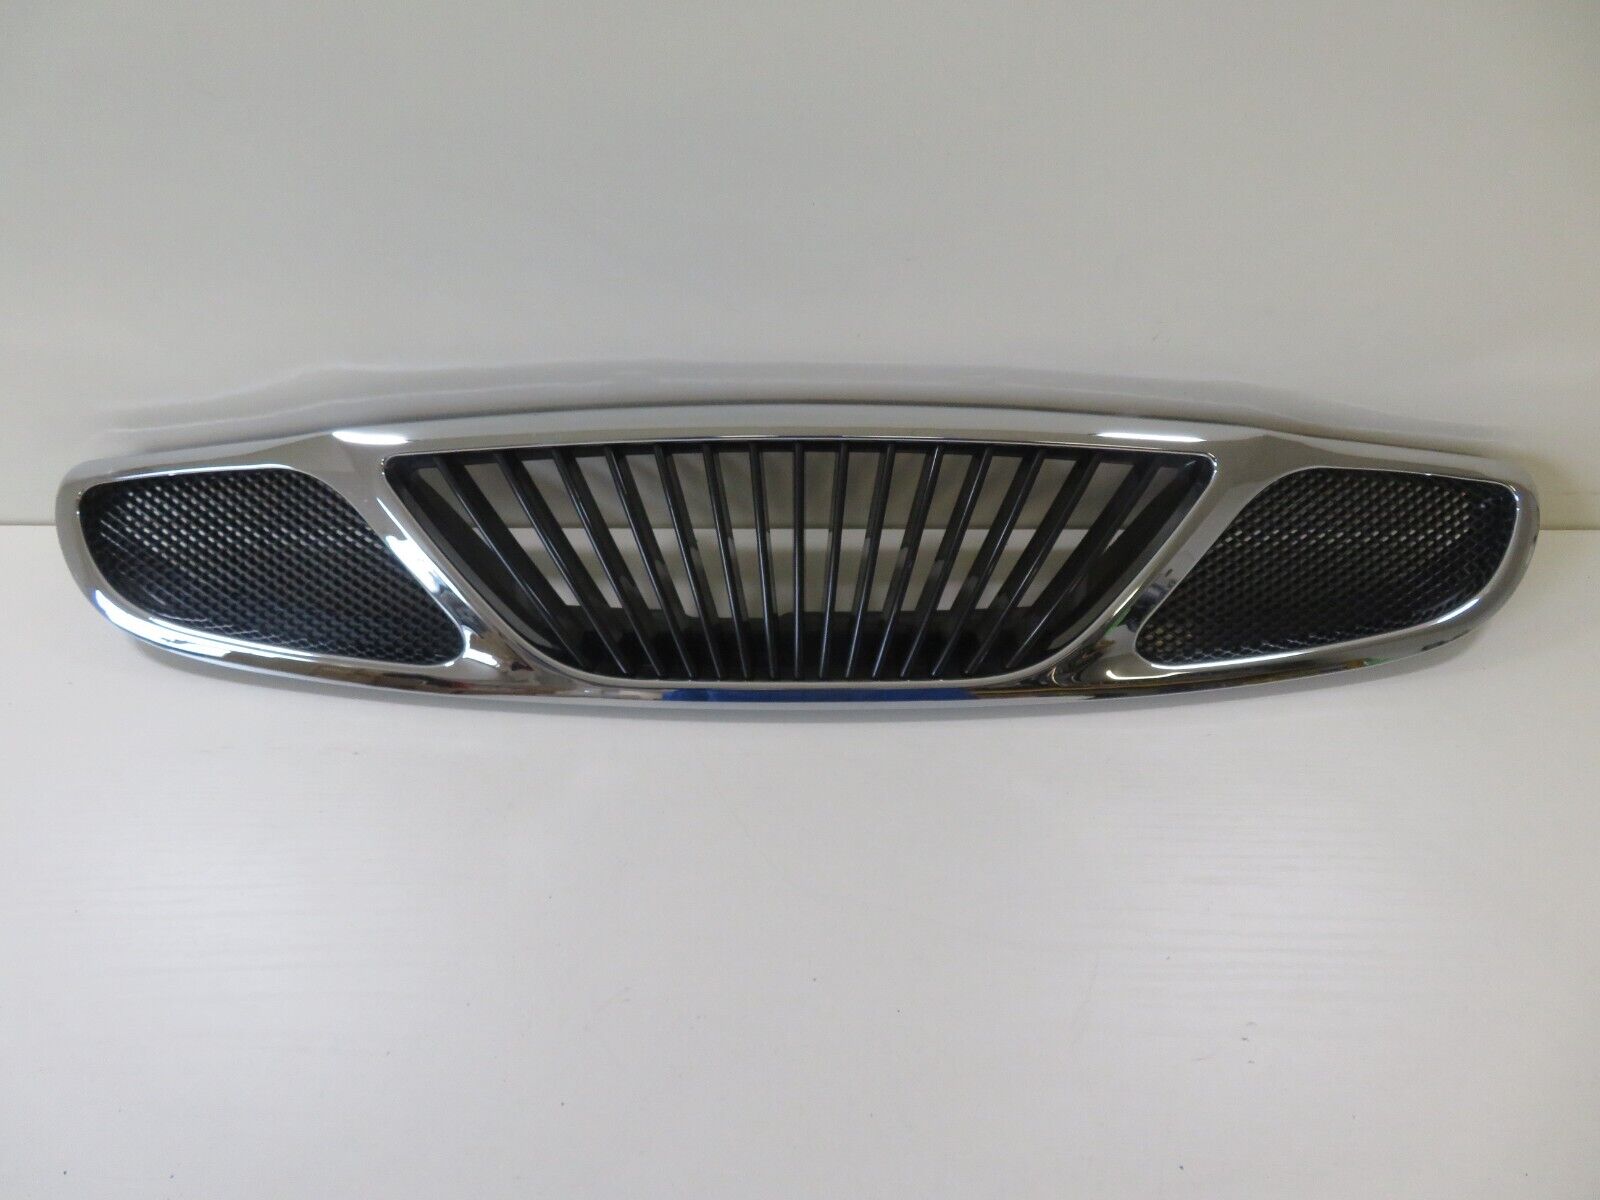 FRONT GRILLE FOR DAEWOO LANOS NUBIRA FOR YEARS 1998-2002